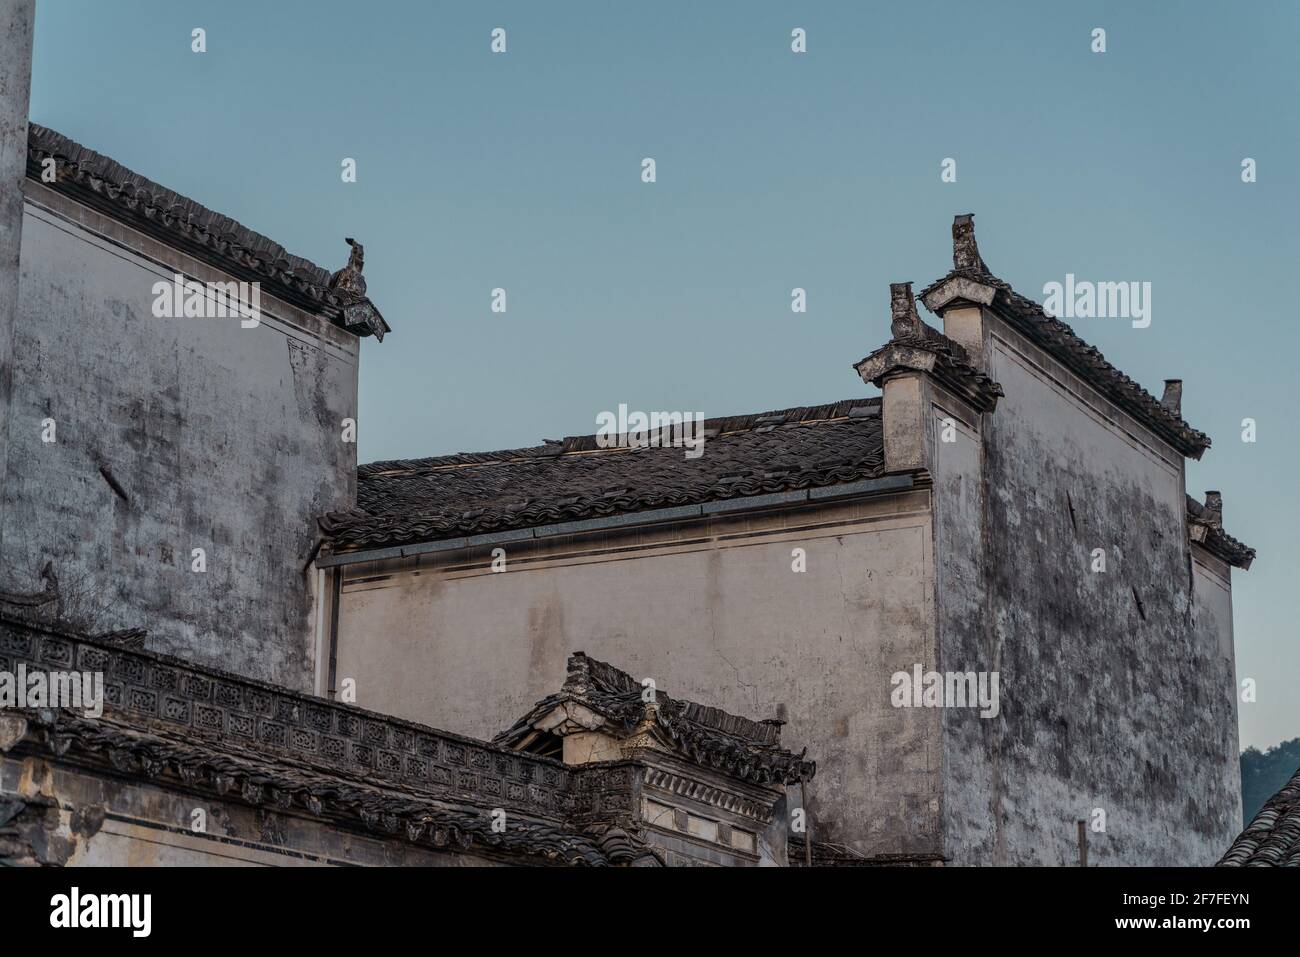 Hongcun village, a historic ancient village in Anhui province, China, at sunset time. Stock Photo